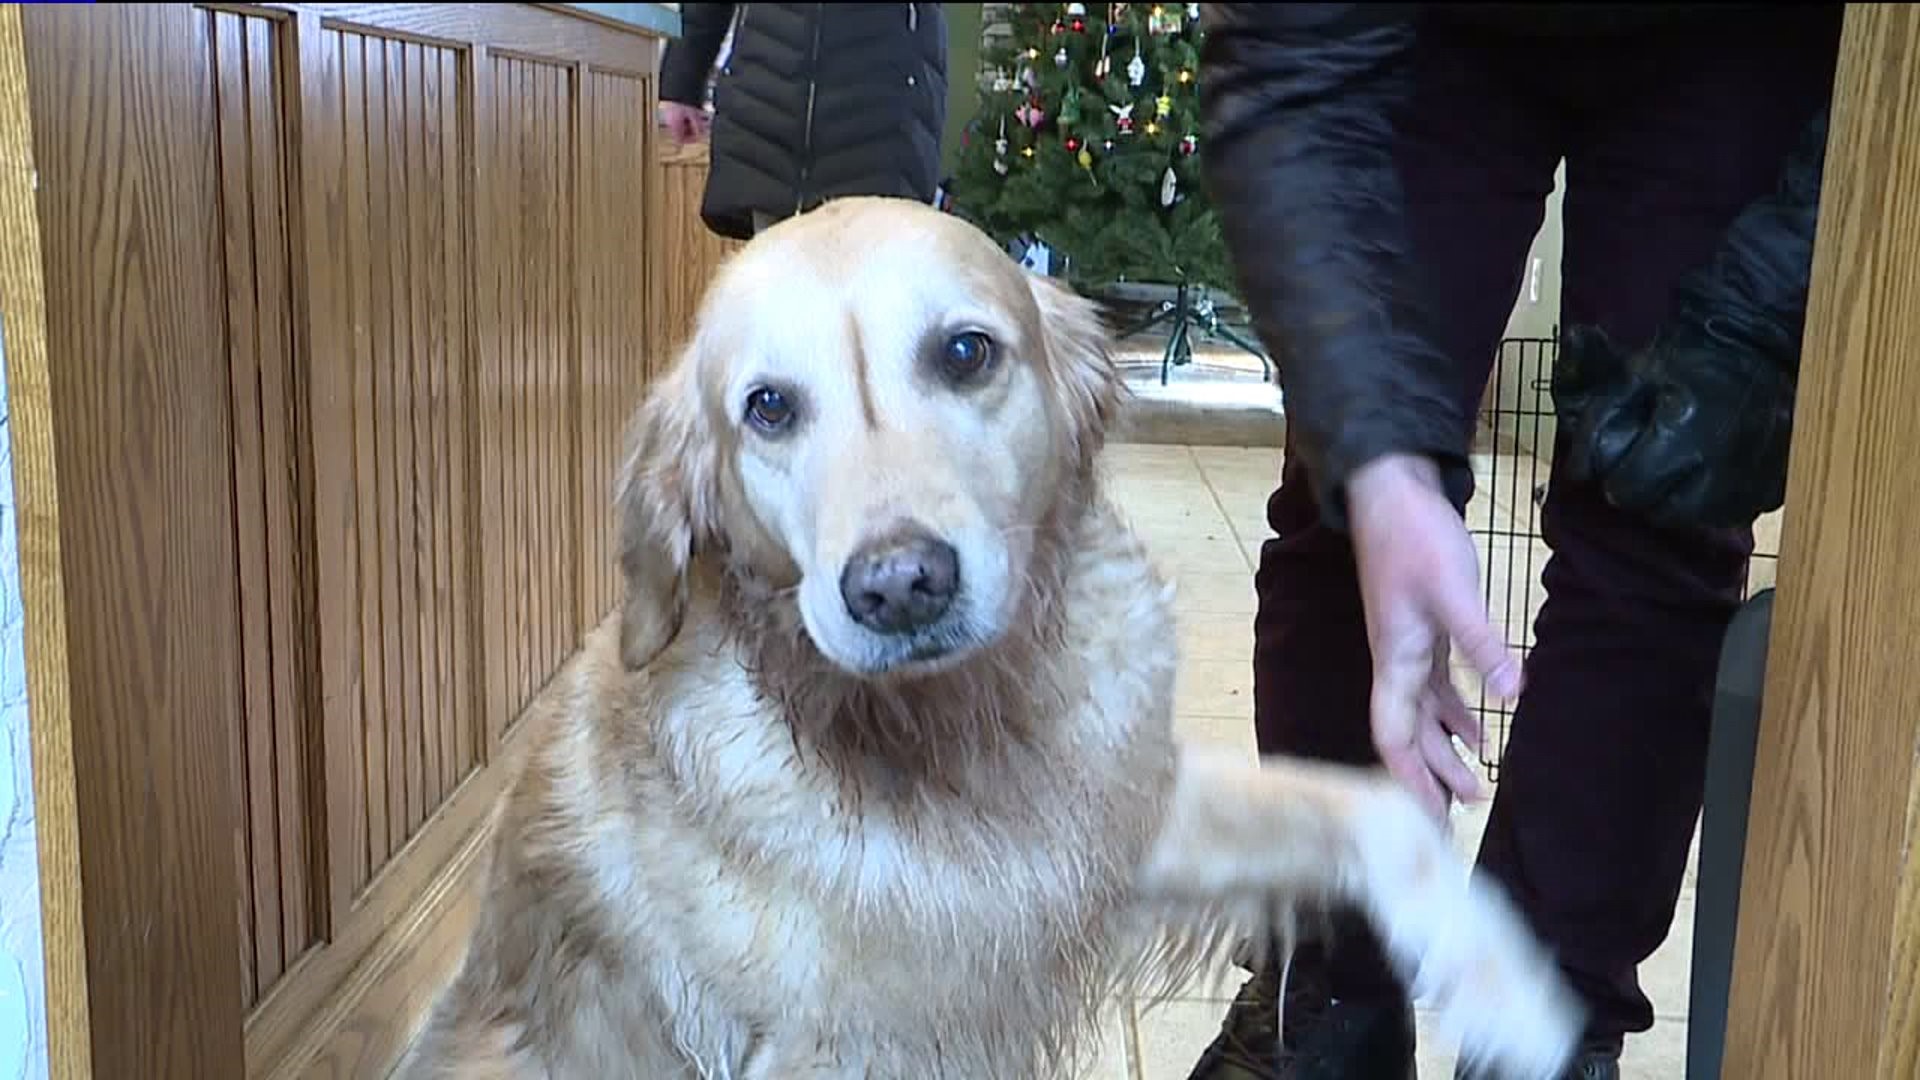 Family Pet 'Buttercup' OK After Dip in Icy Pond